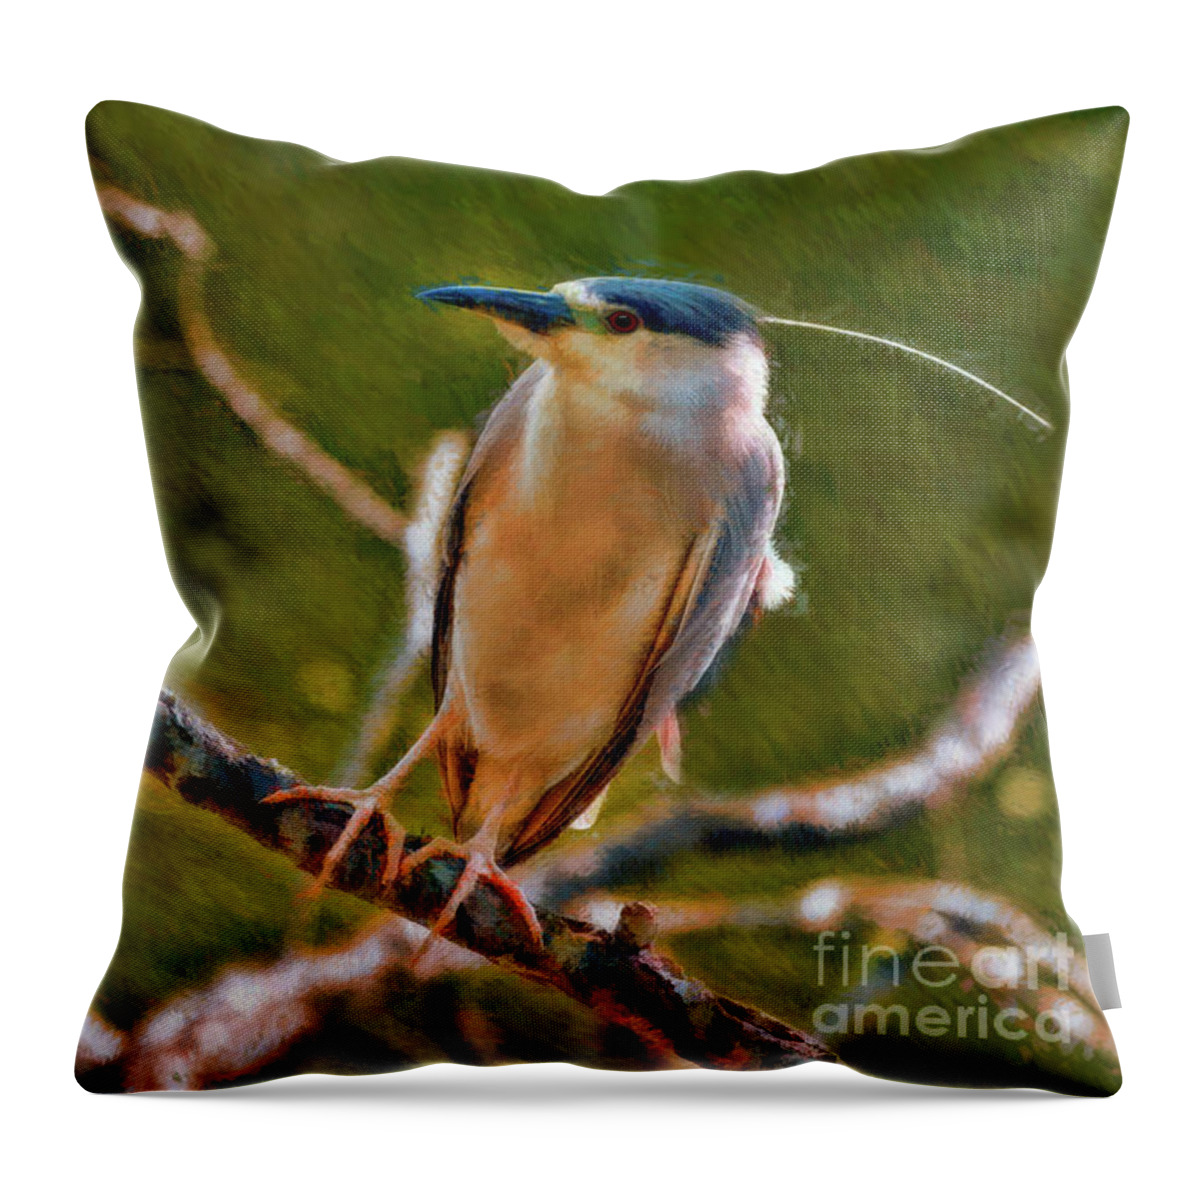 Birds Throw Pillow featuring the photograph Juvenile Black-Crowned Night Heron On Look Out by Blake Richards